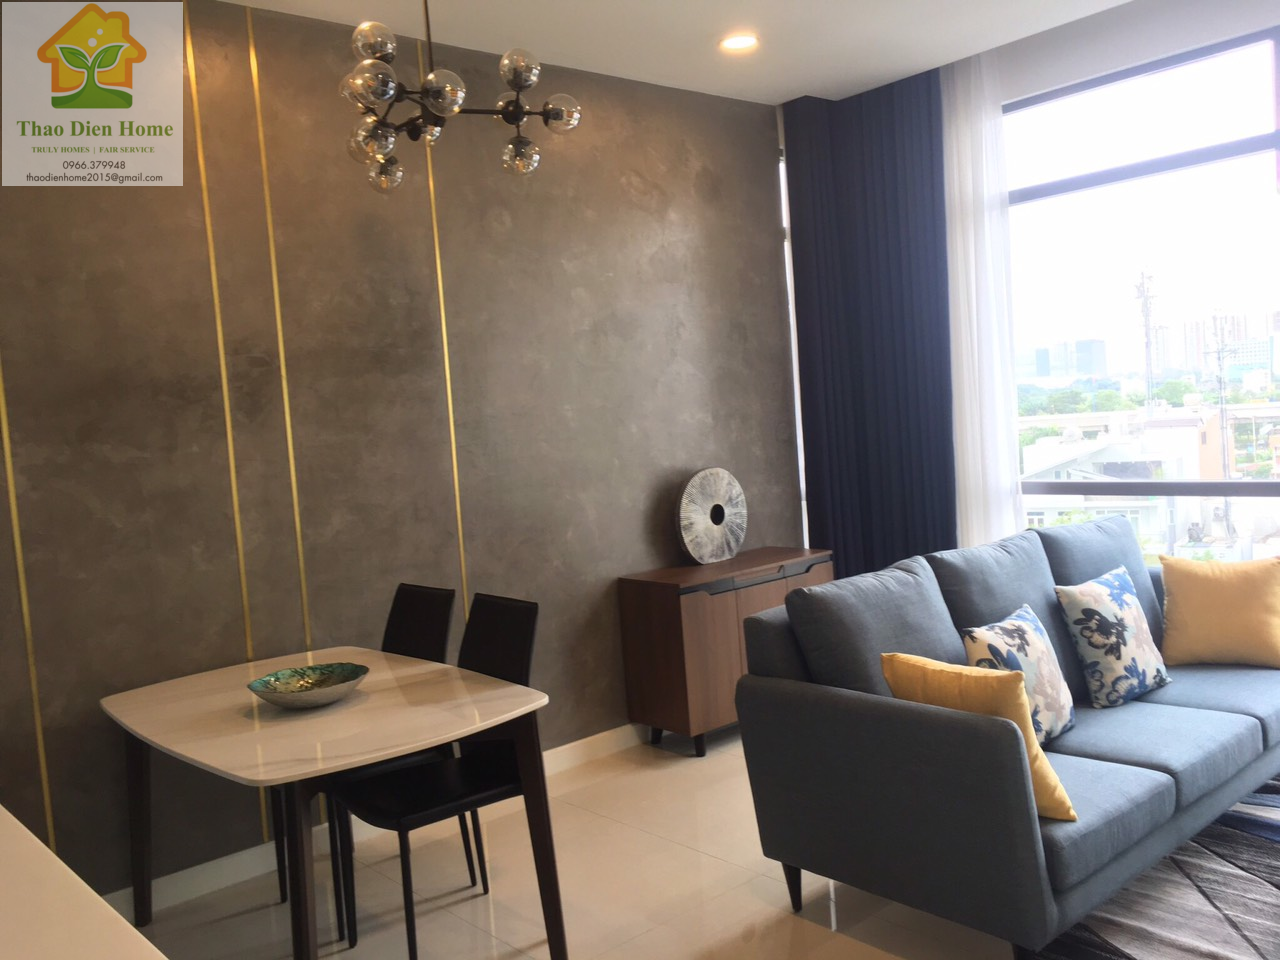 The Nassim Apartment, So Beautiful and Luxurious Design 1 Bedroom